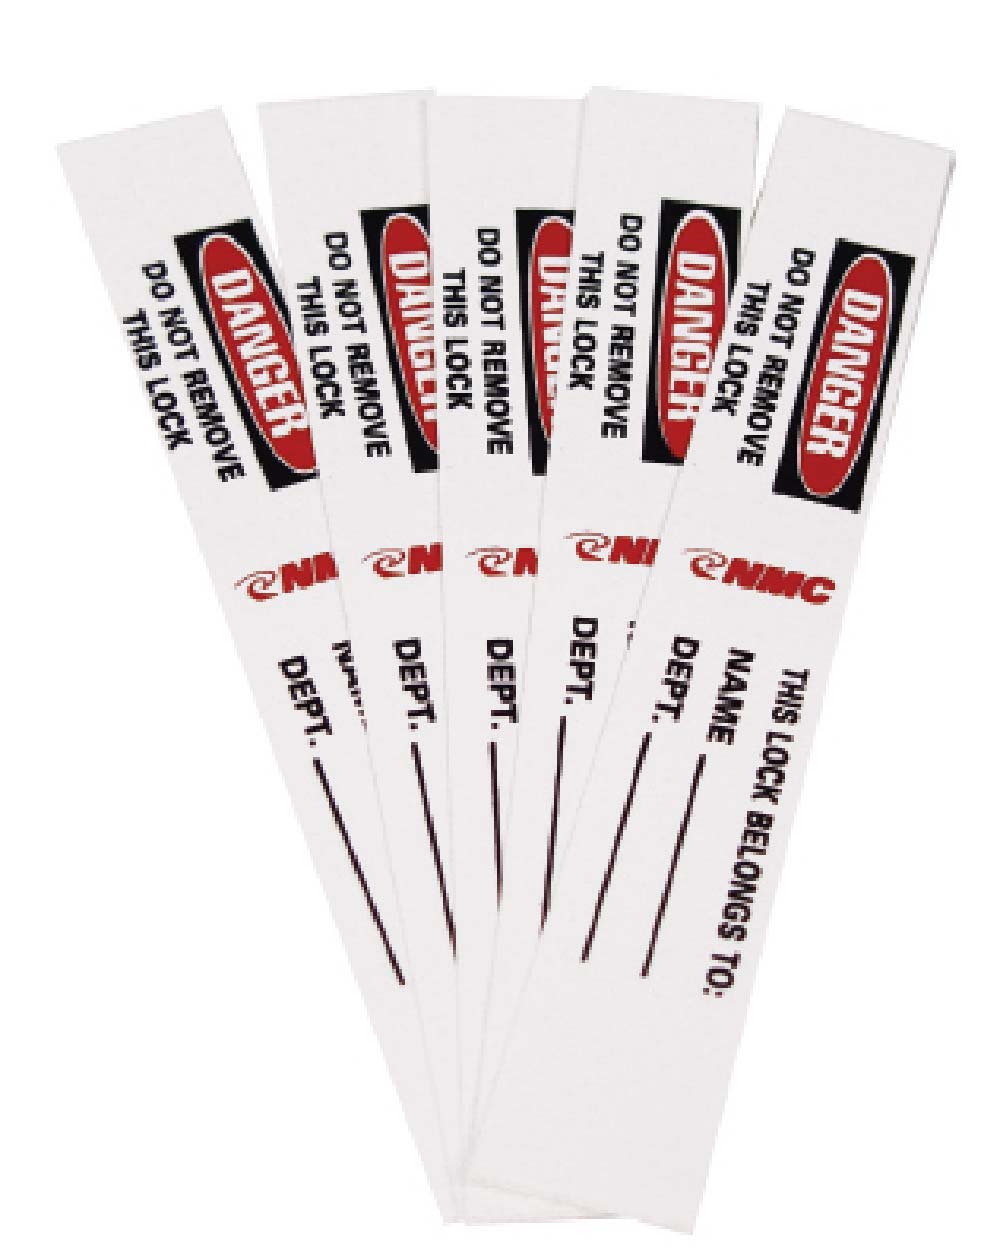 Lock Labels - Pack of 40-eSafety Supplies, Inc